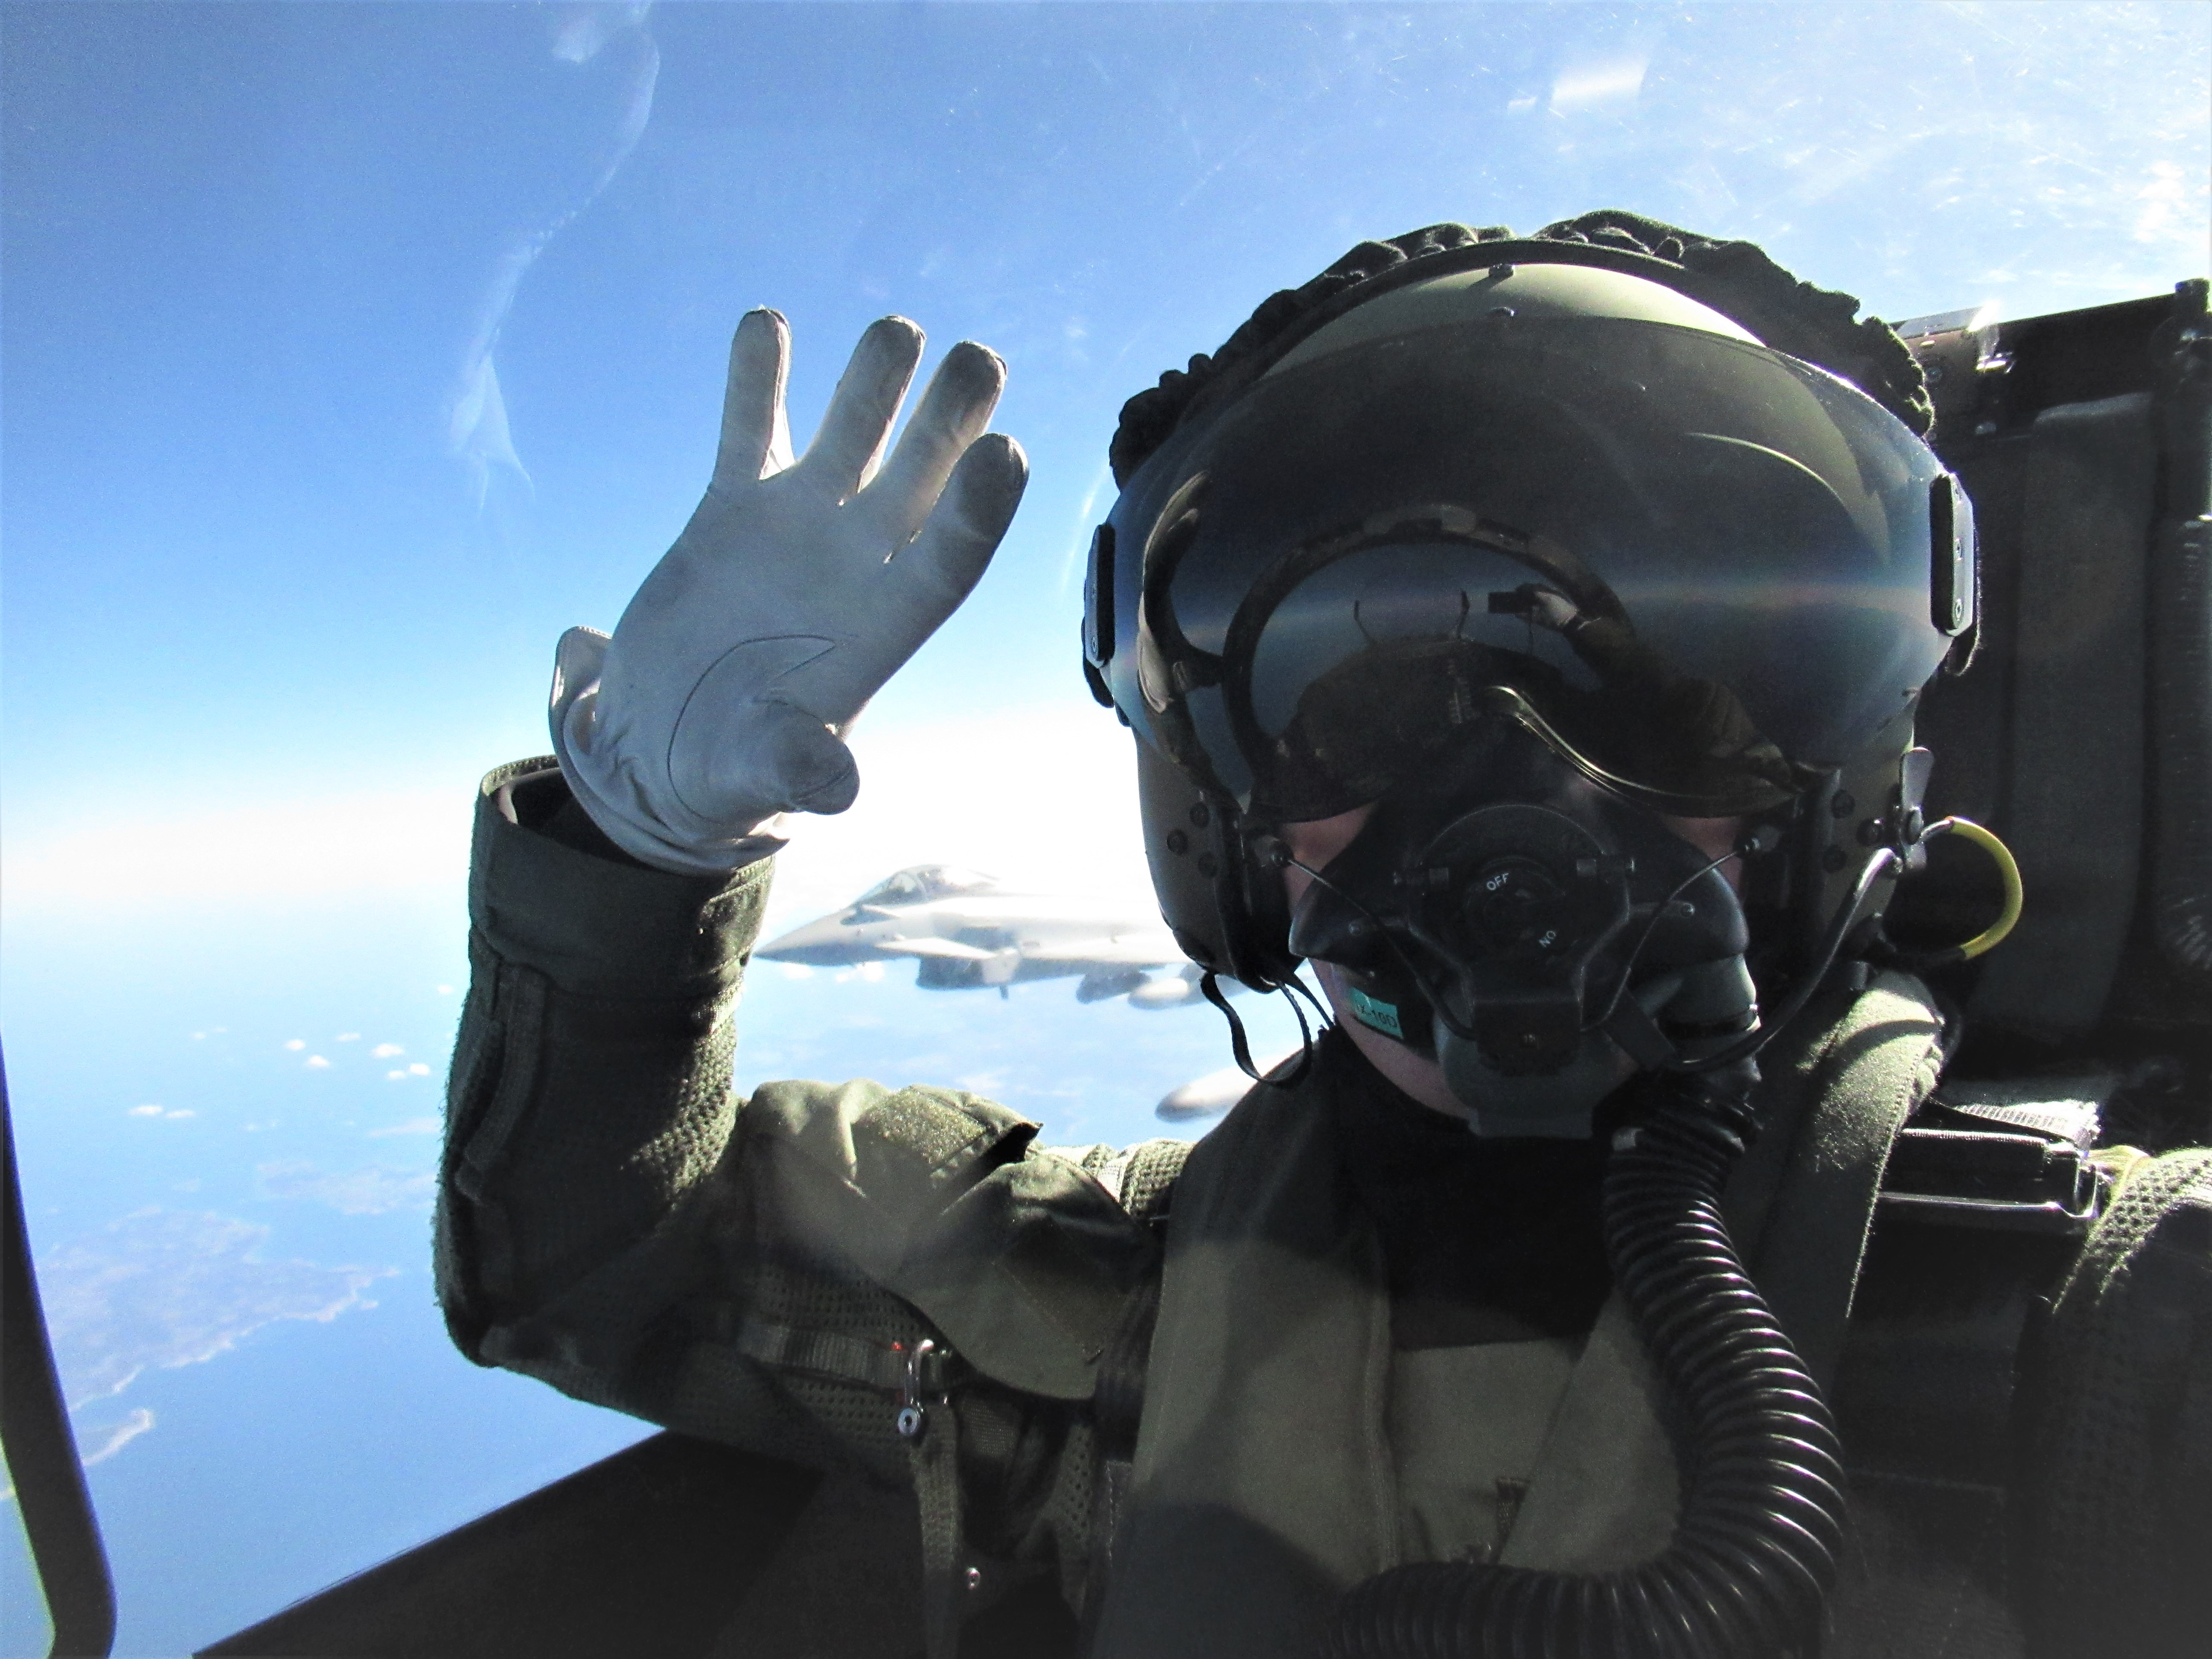 Cockpit view of pilot in aircraft waving at the camera, with another Typhoon aircraft in the background.